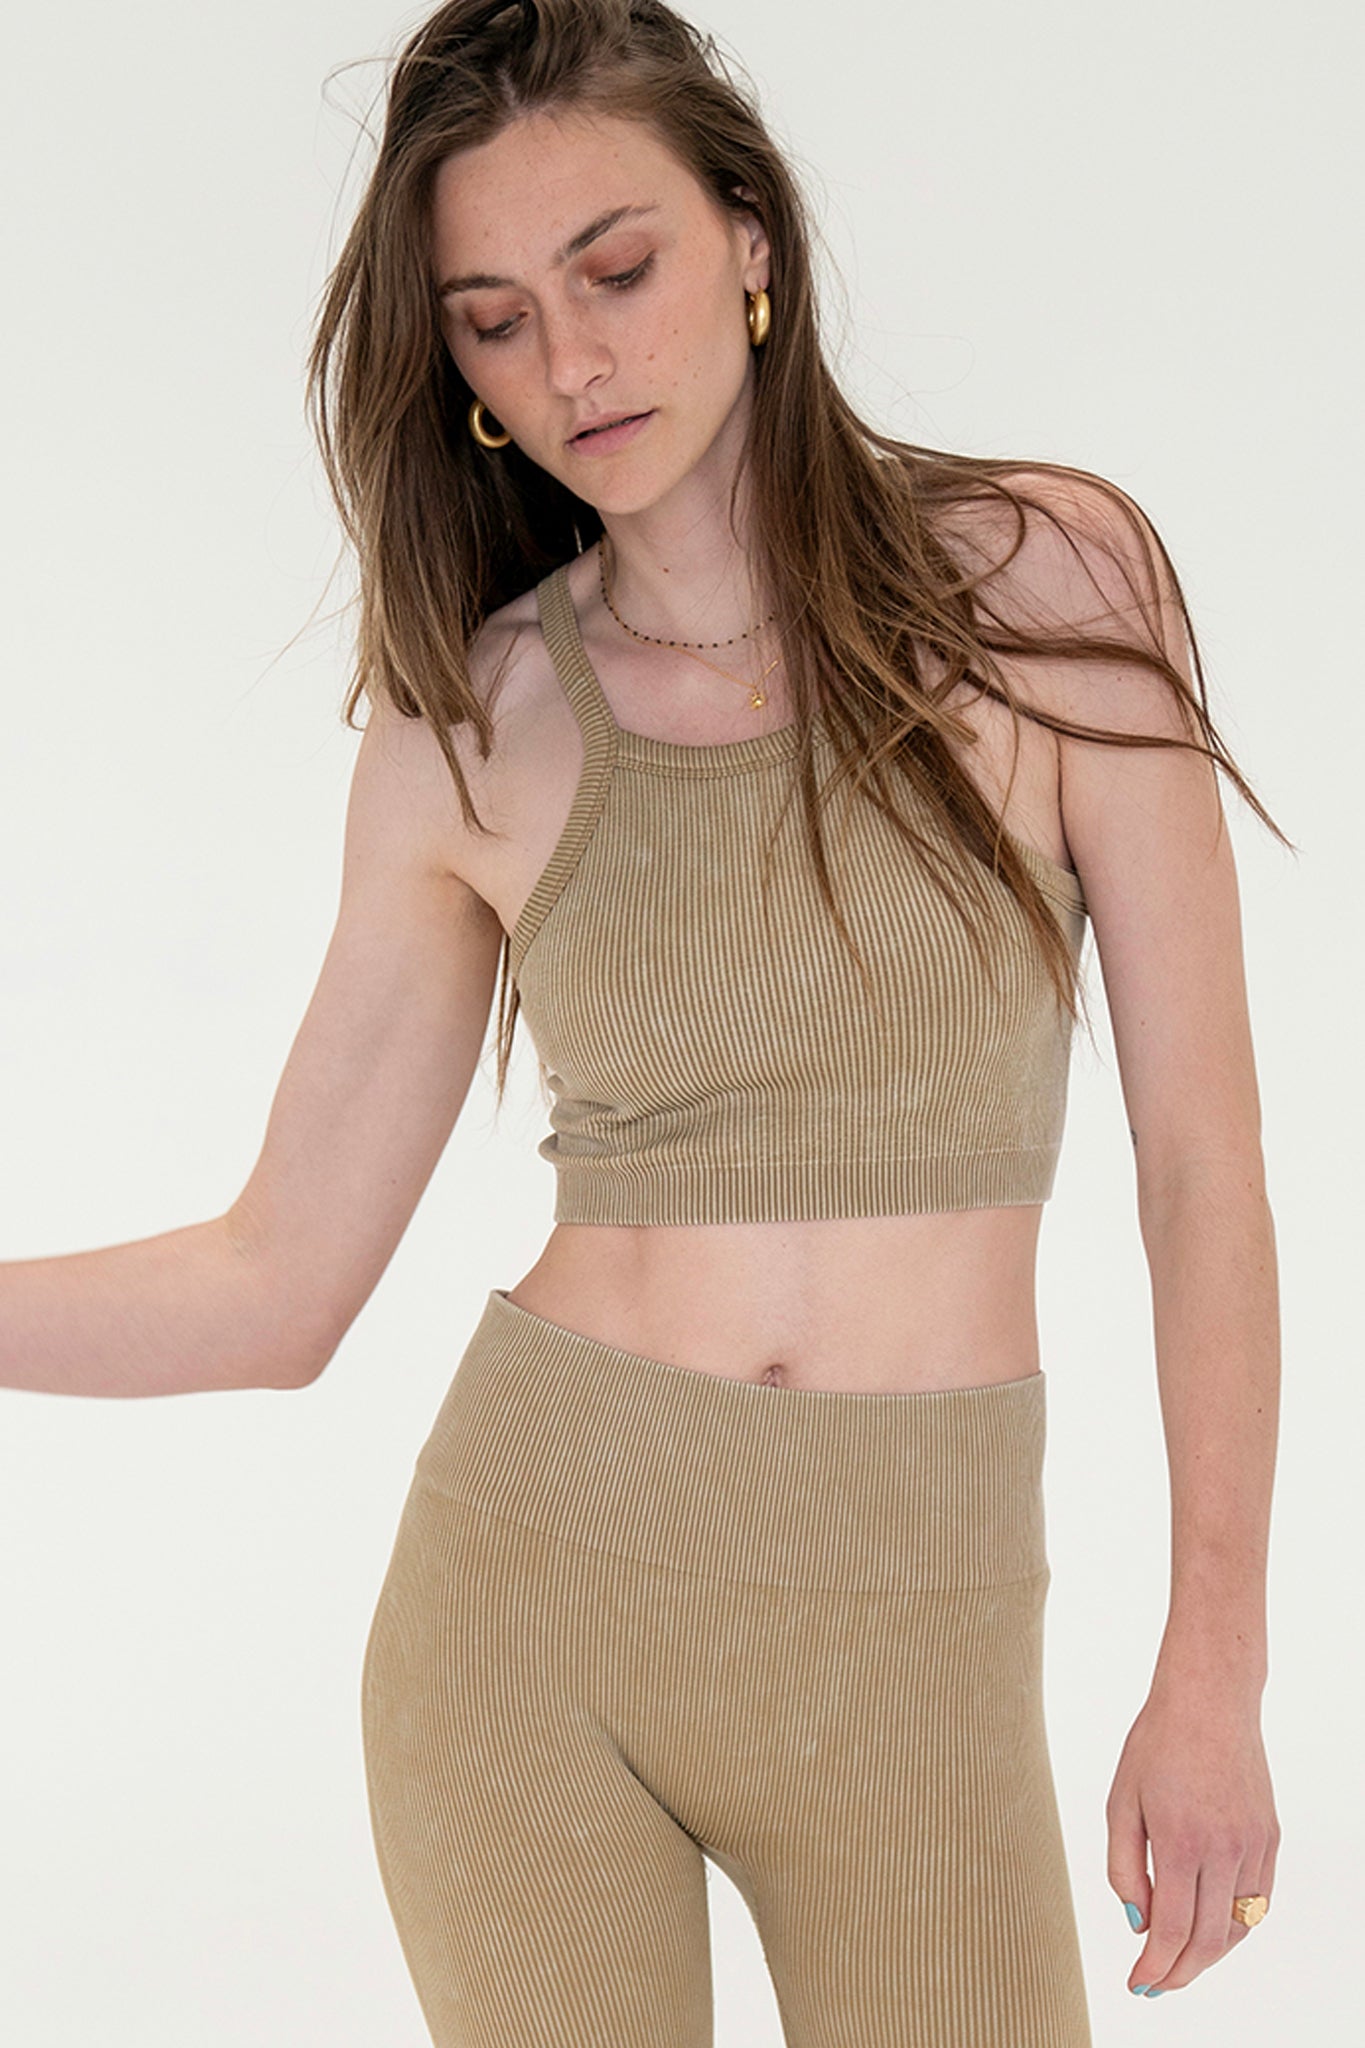 View 2 of Mono Ribbed Cropped Tank, a Tops from Larrea Cove. Detail: .